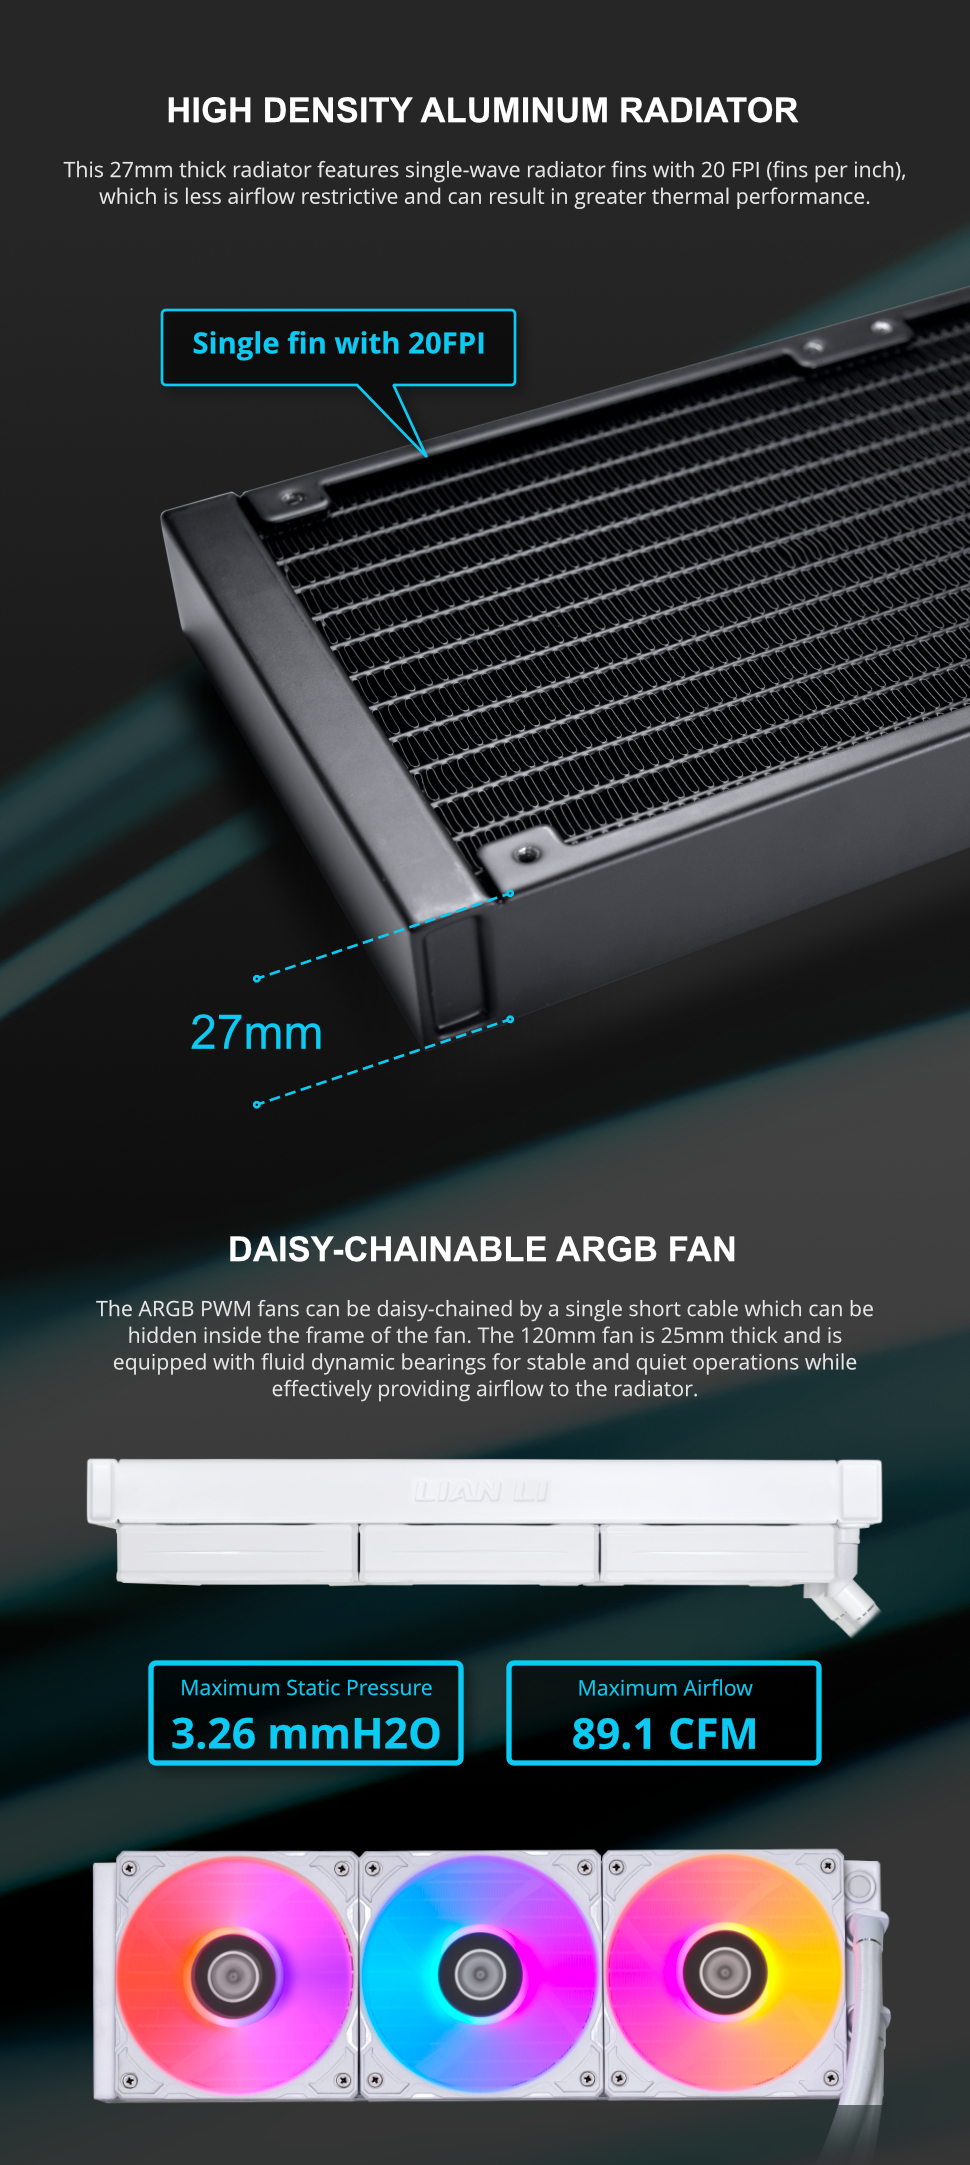 A large marketing image providing additional information about the product Lian Li Galahad II Trinity 360 RGB 360mm AIO Liquid CPU Cooler – Black - Additional alt info not provided